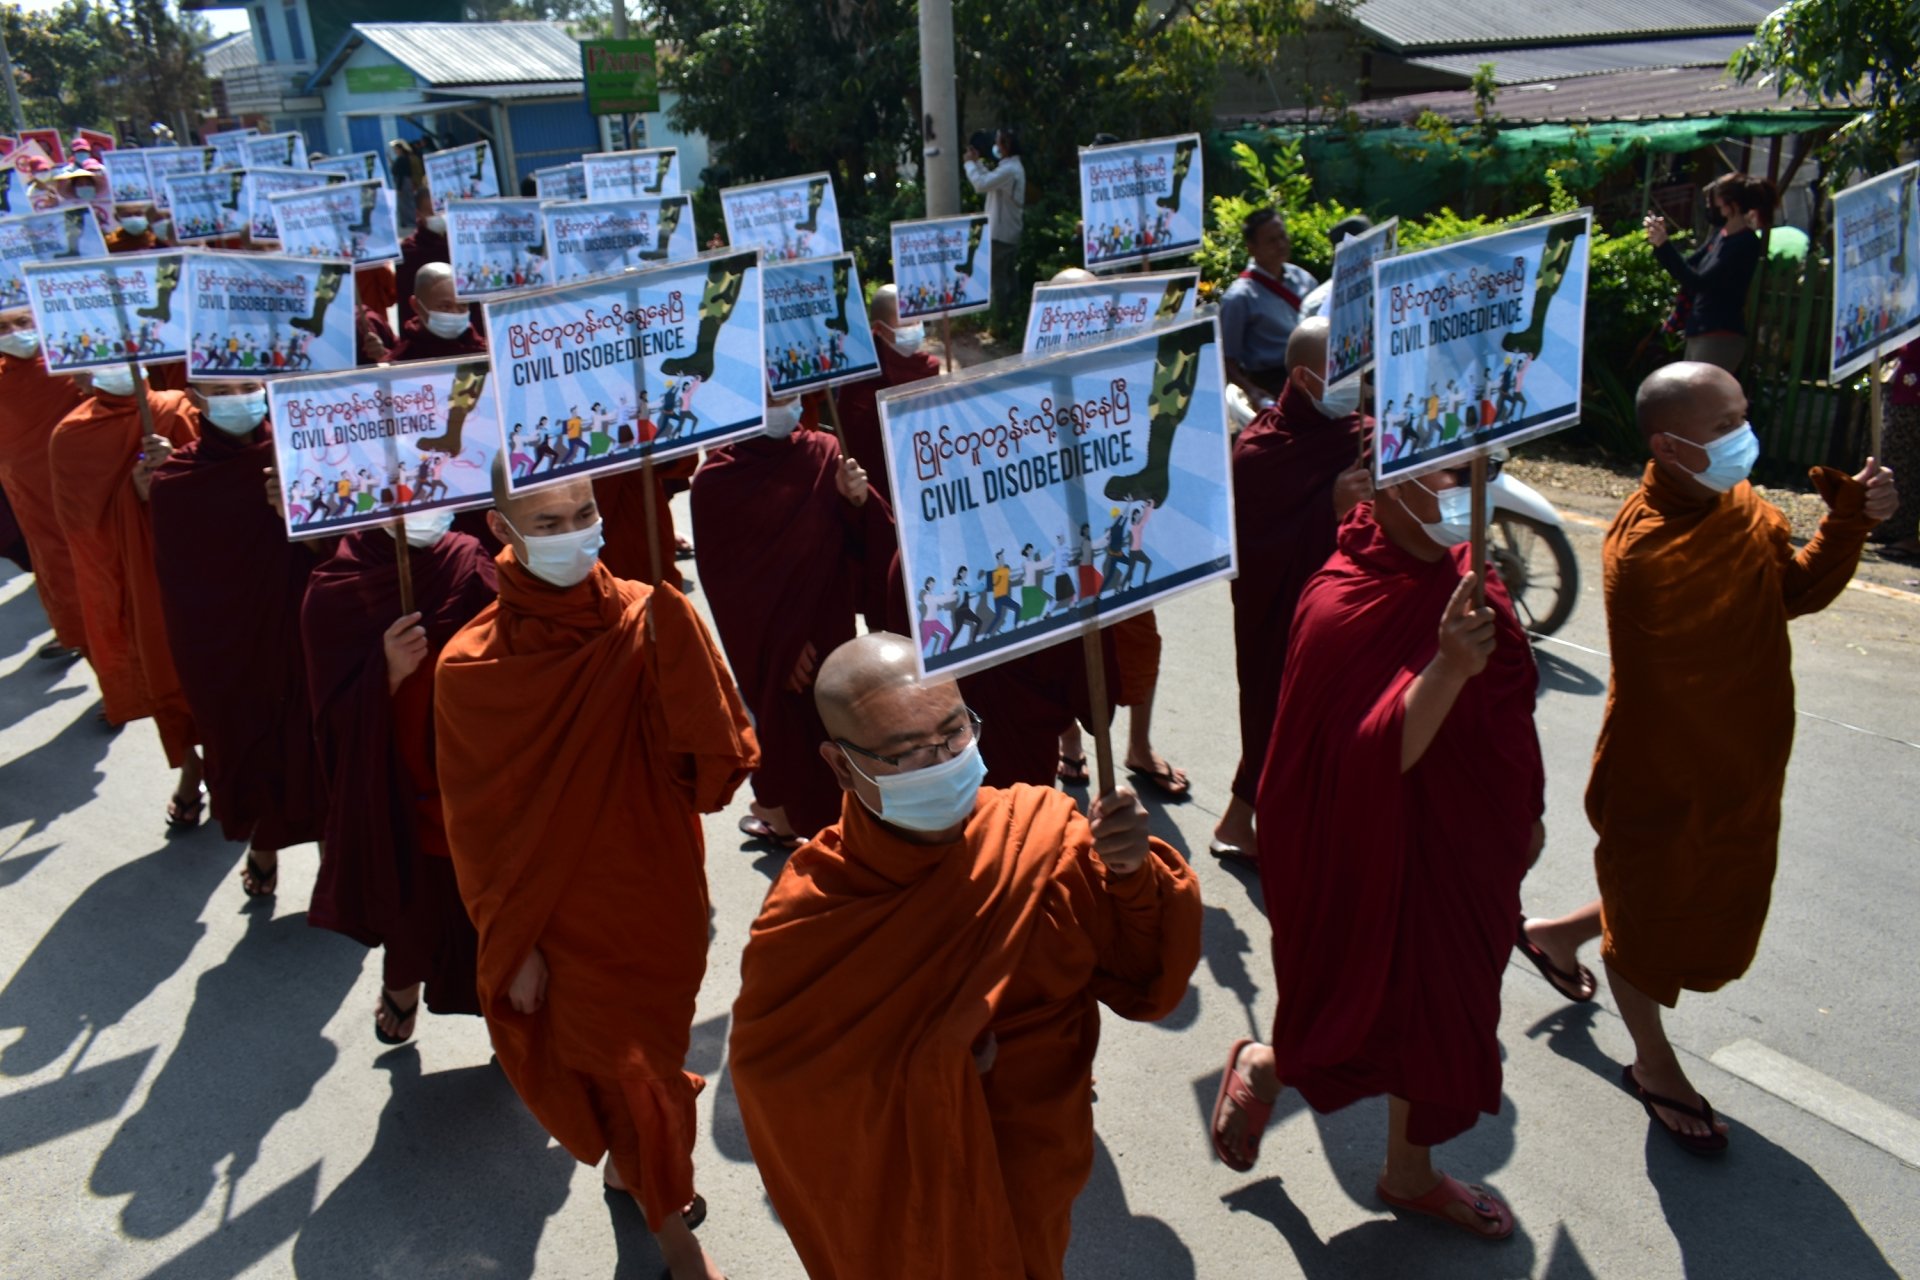 A grou pof monks in robes carrying protest signs as they march in the streets.